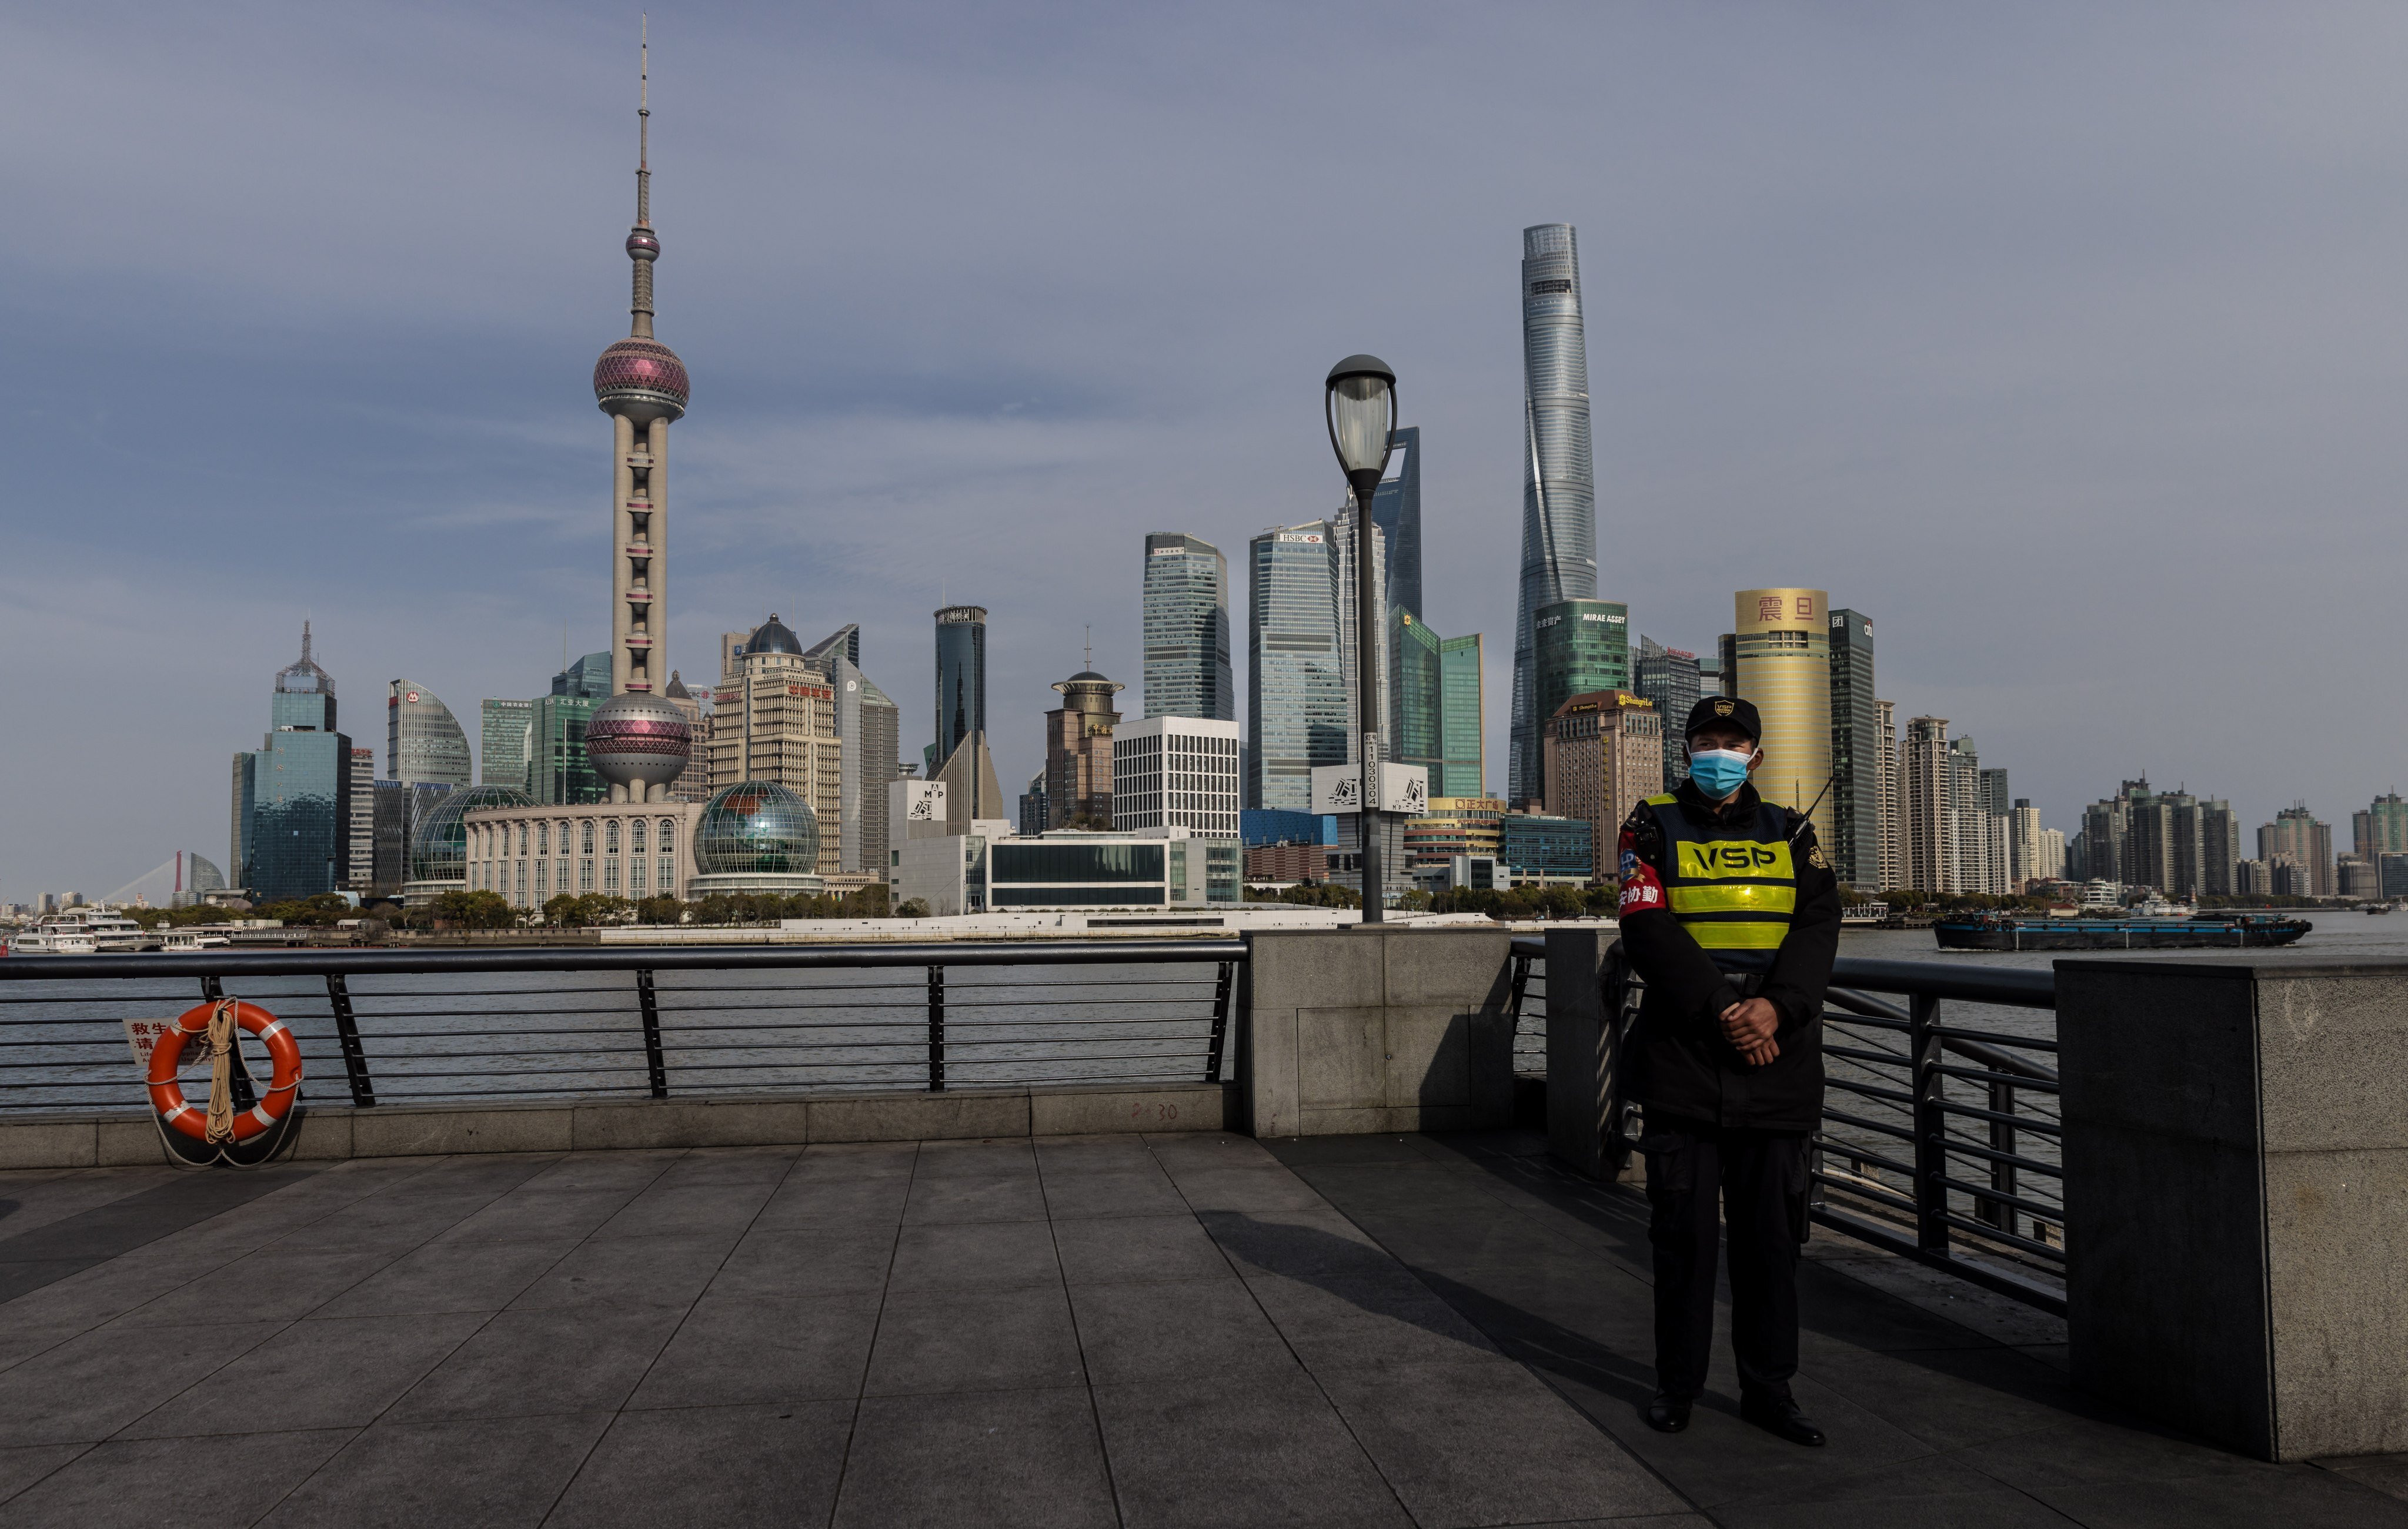 A police officer stands guard on the Bund with Pudong’s main financial district in the background in Shanghai on March 28. Photo: EPA-EFE